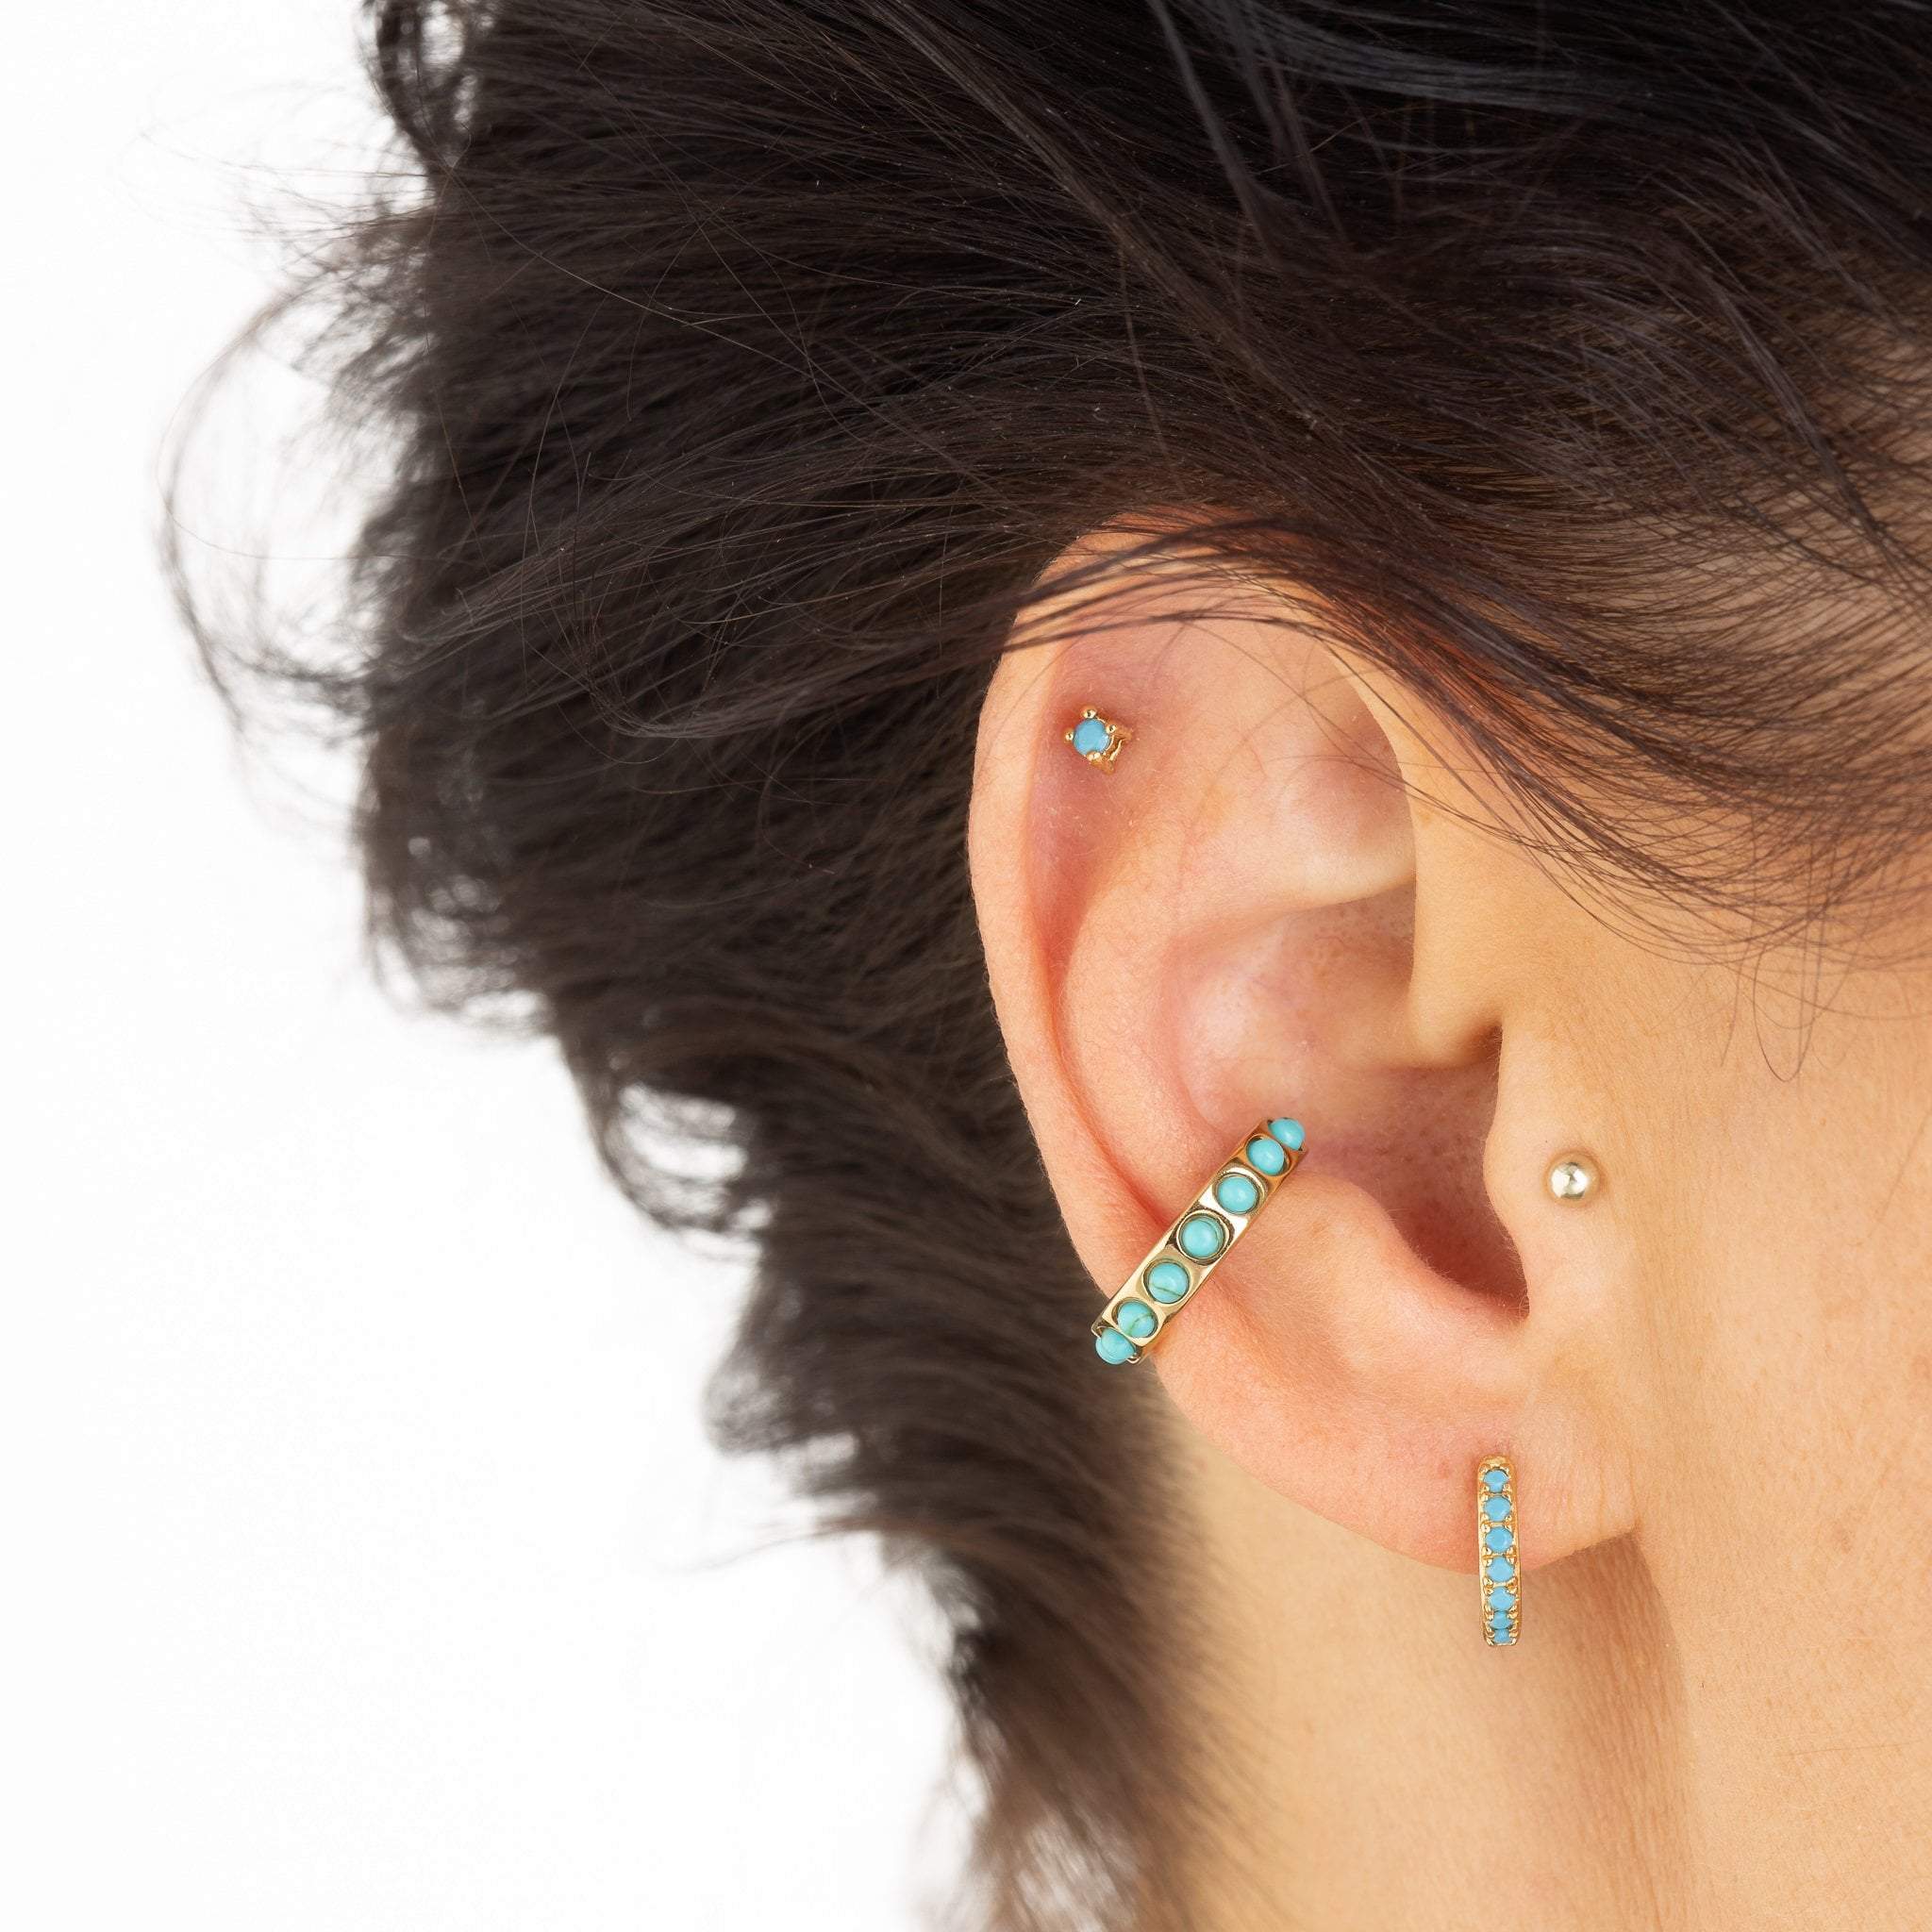  Turquoise Stone Huggie and Tiny Stud Set of Earrings - by Scream Pretty